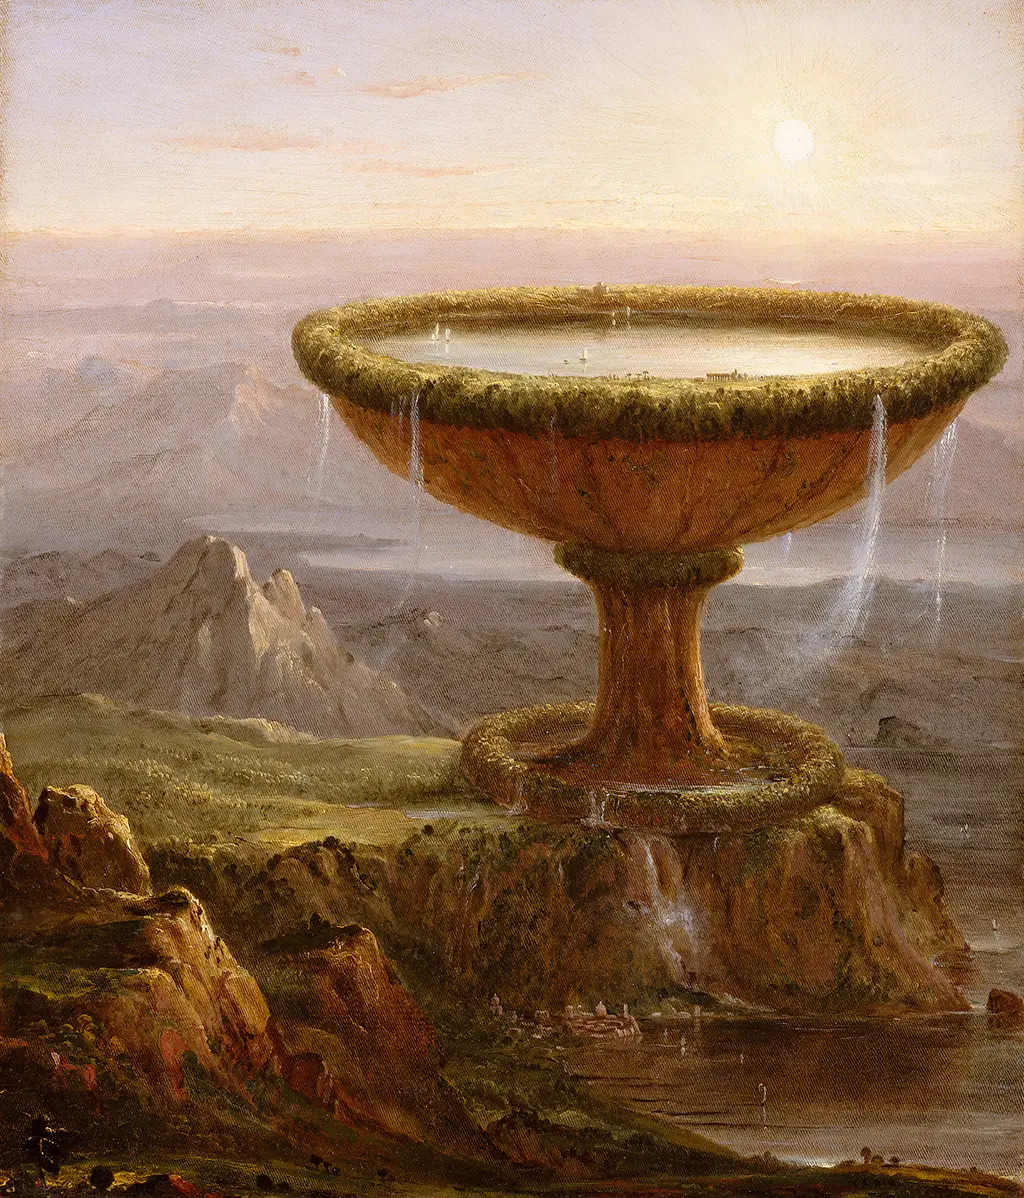 The Titan's Goblet in Detail Thomas Cole